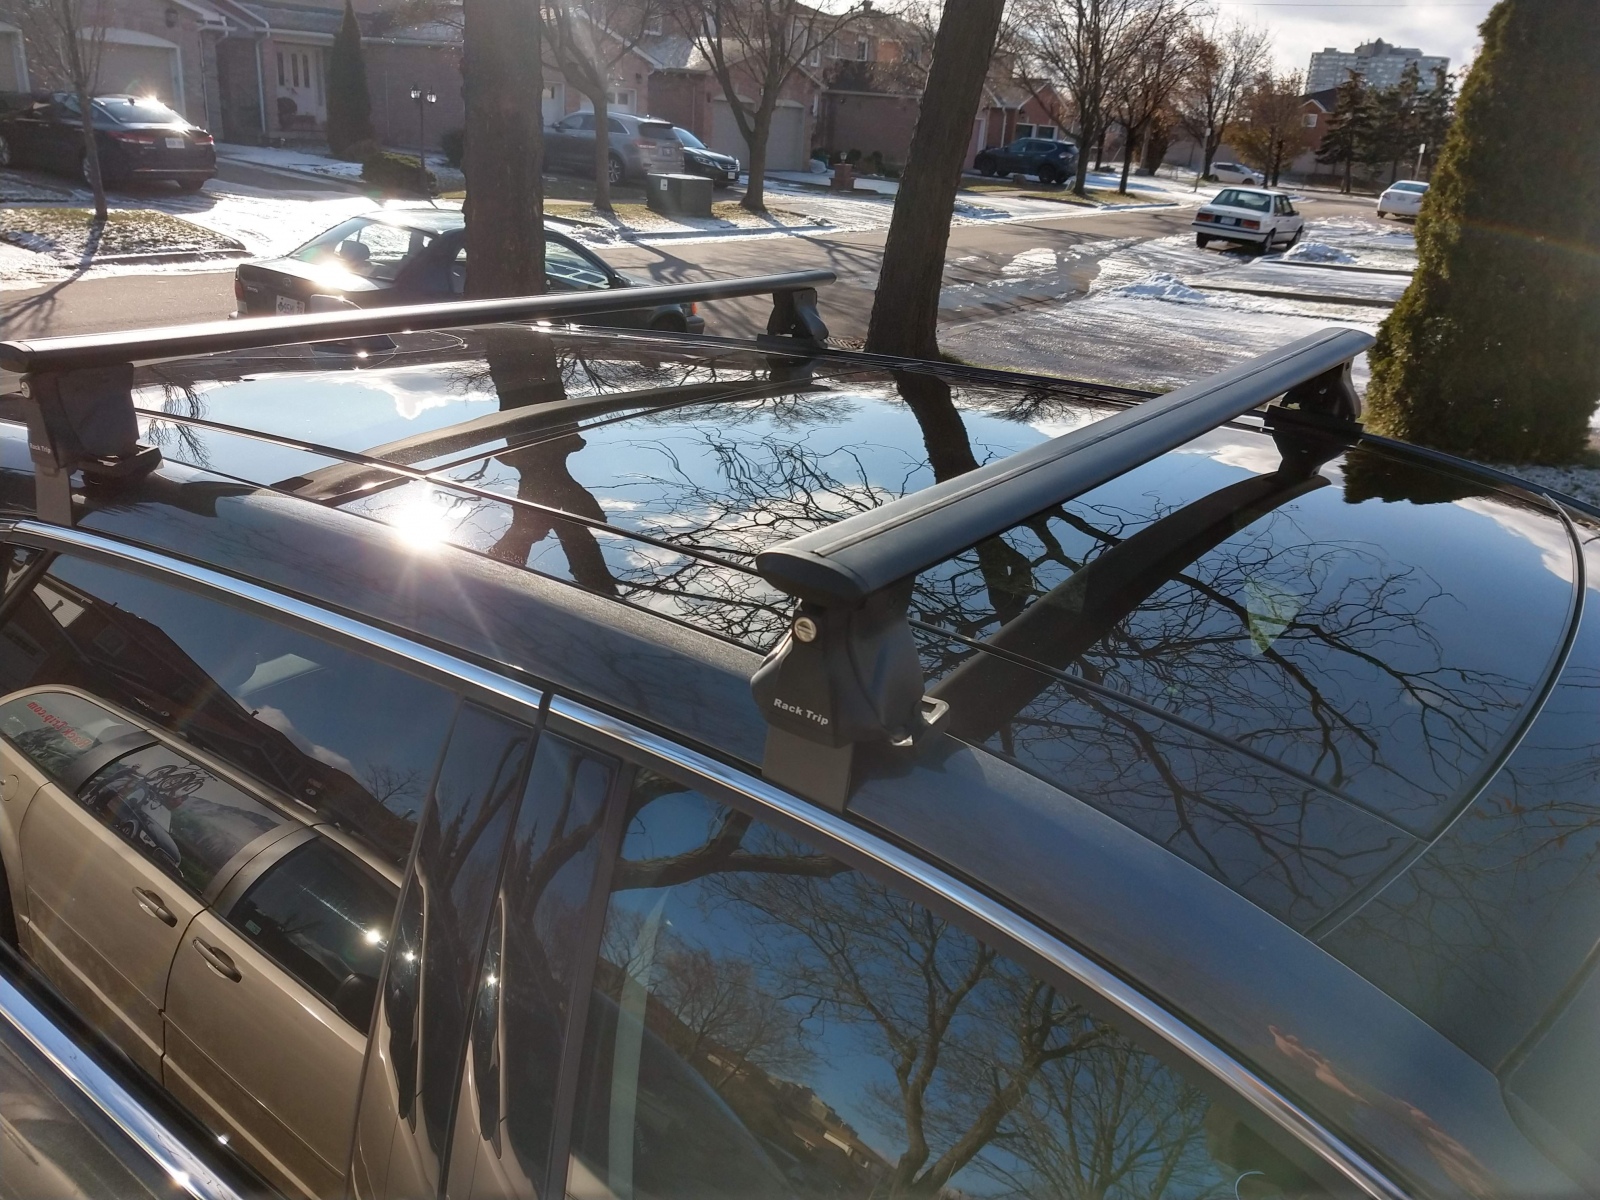 2019 Ford Edge Panoramic Glass Roof Rack - RackTrip - Canada Car Racks and More! Ford Edge Roof Rack With Panoramic Roof